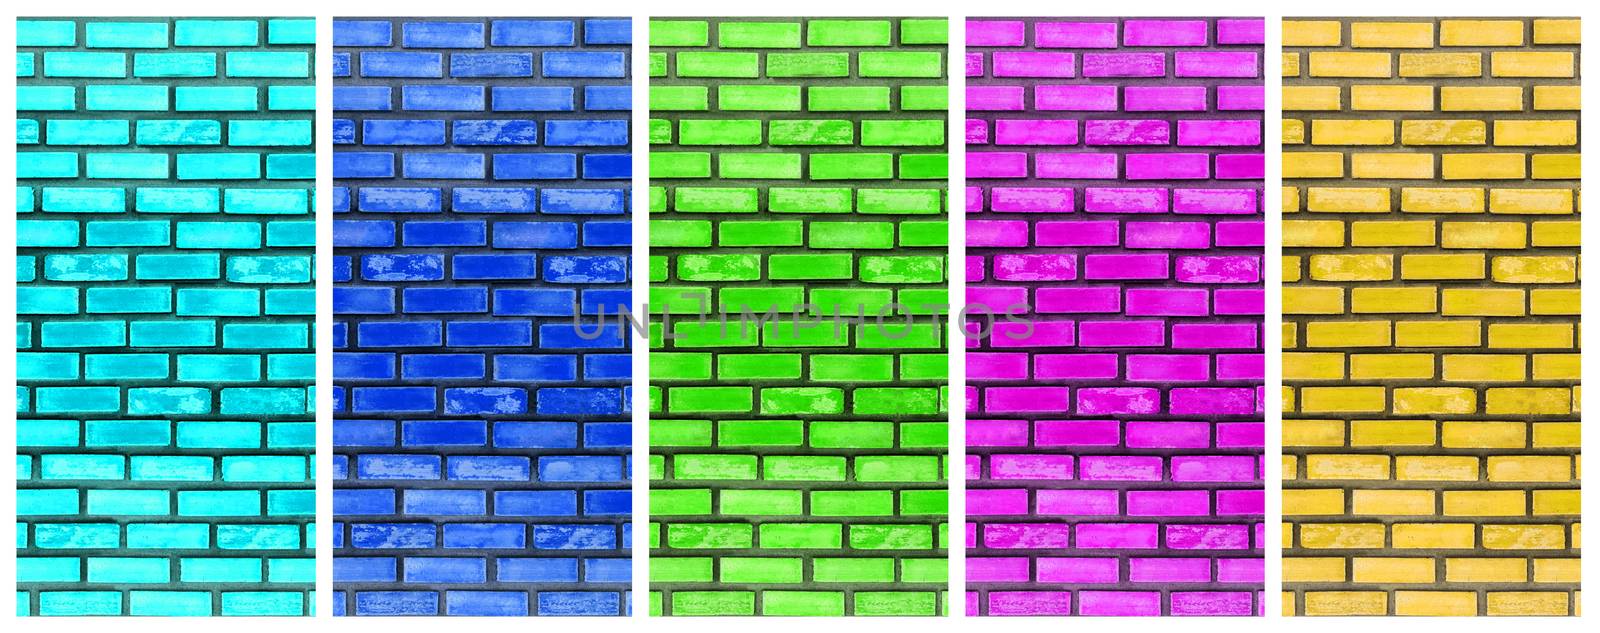 Texture of colorful block brick wall. Abstract background. by TEERASAK